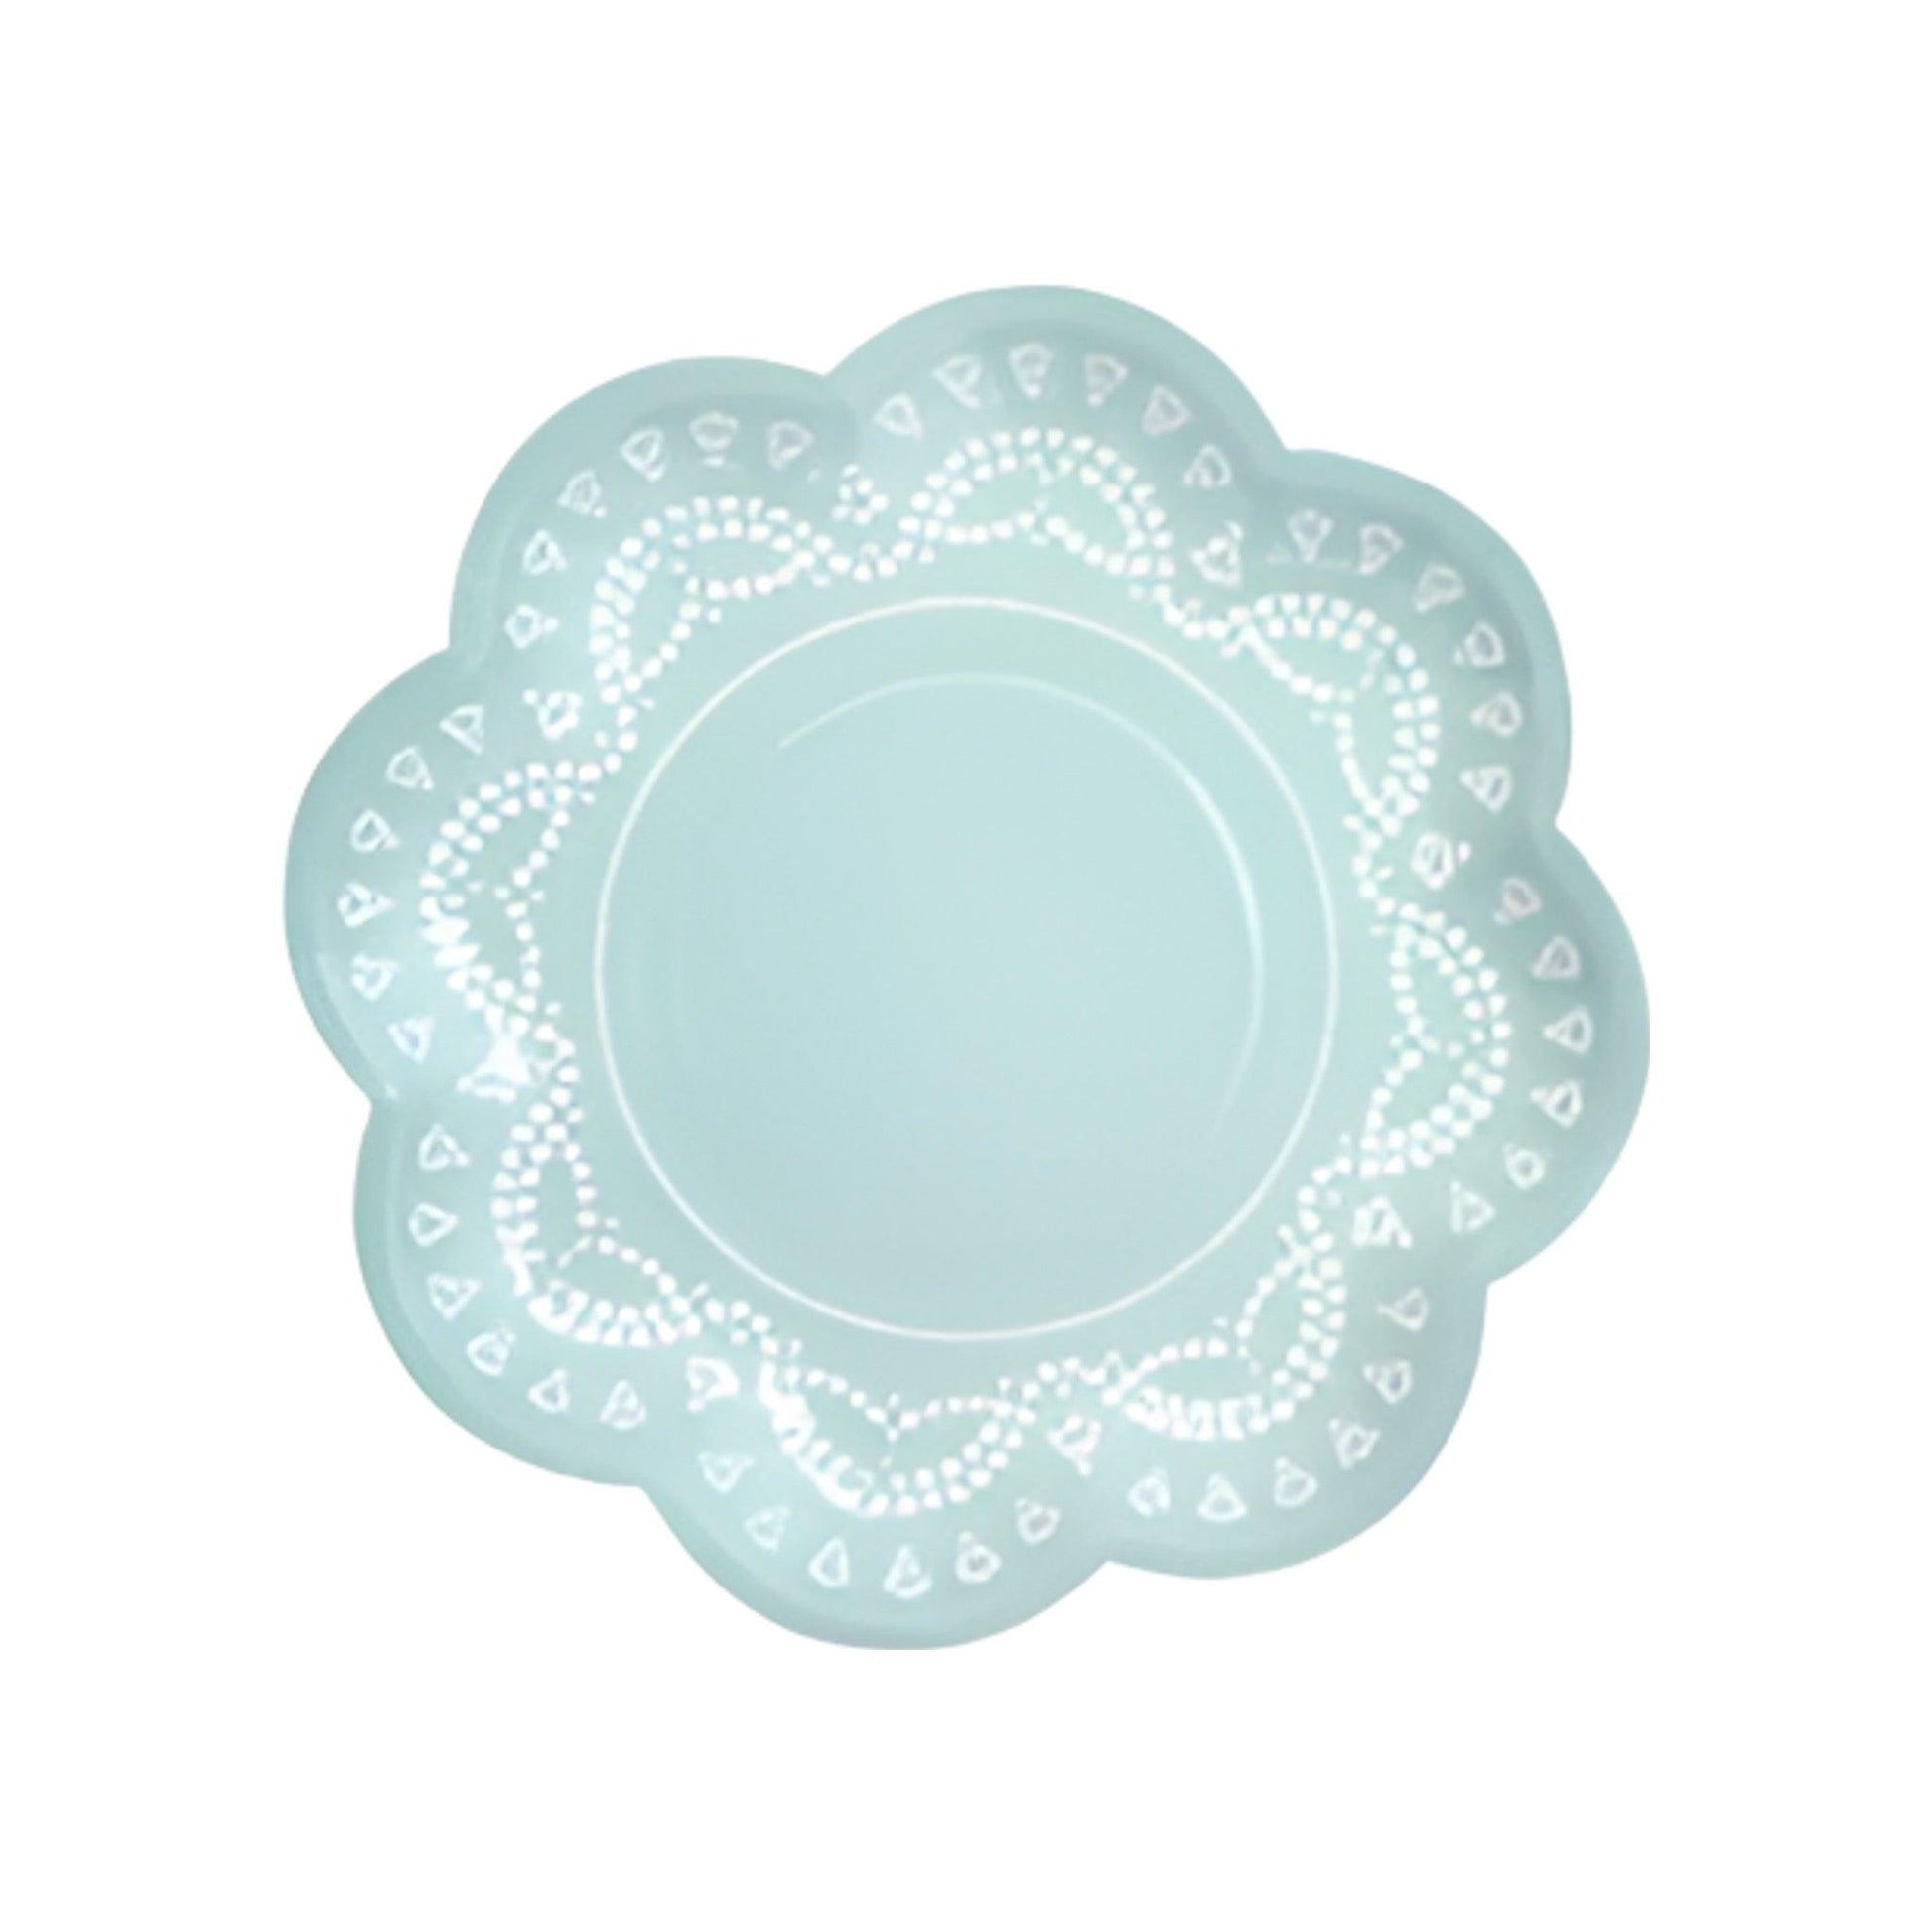 Tiffanesque Vintage paper plate in tiffany blue with white lace pattern